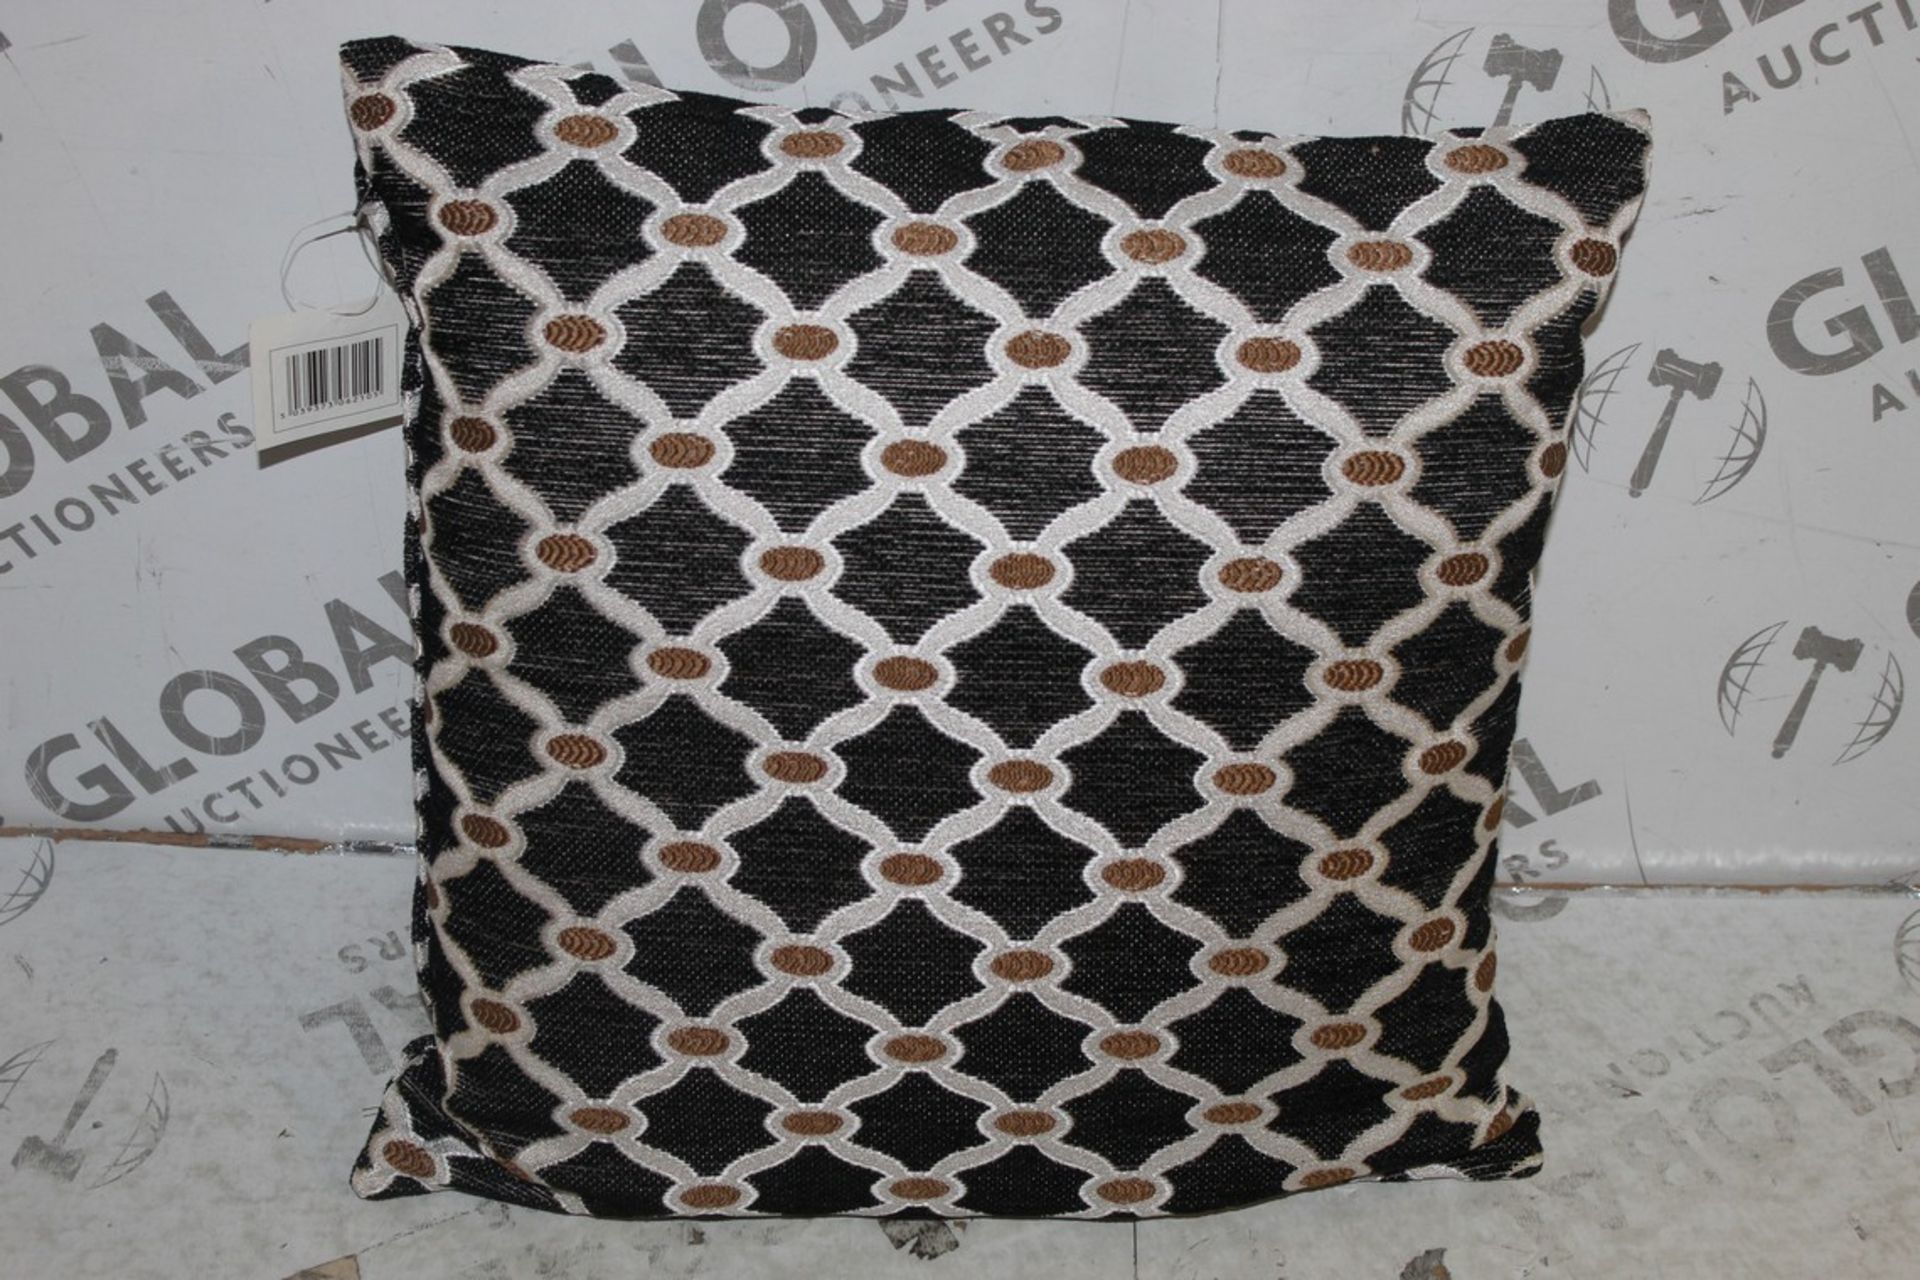 Berkeley 18" x 18" Black Cushions RRP £20 Each (18854) (Pictures Are For Illustration Purposes Only)